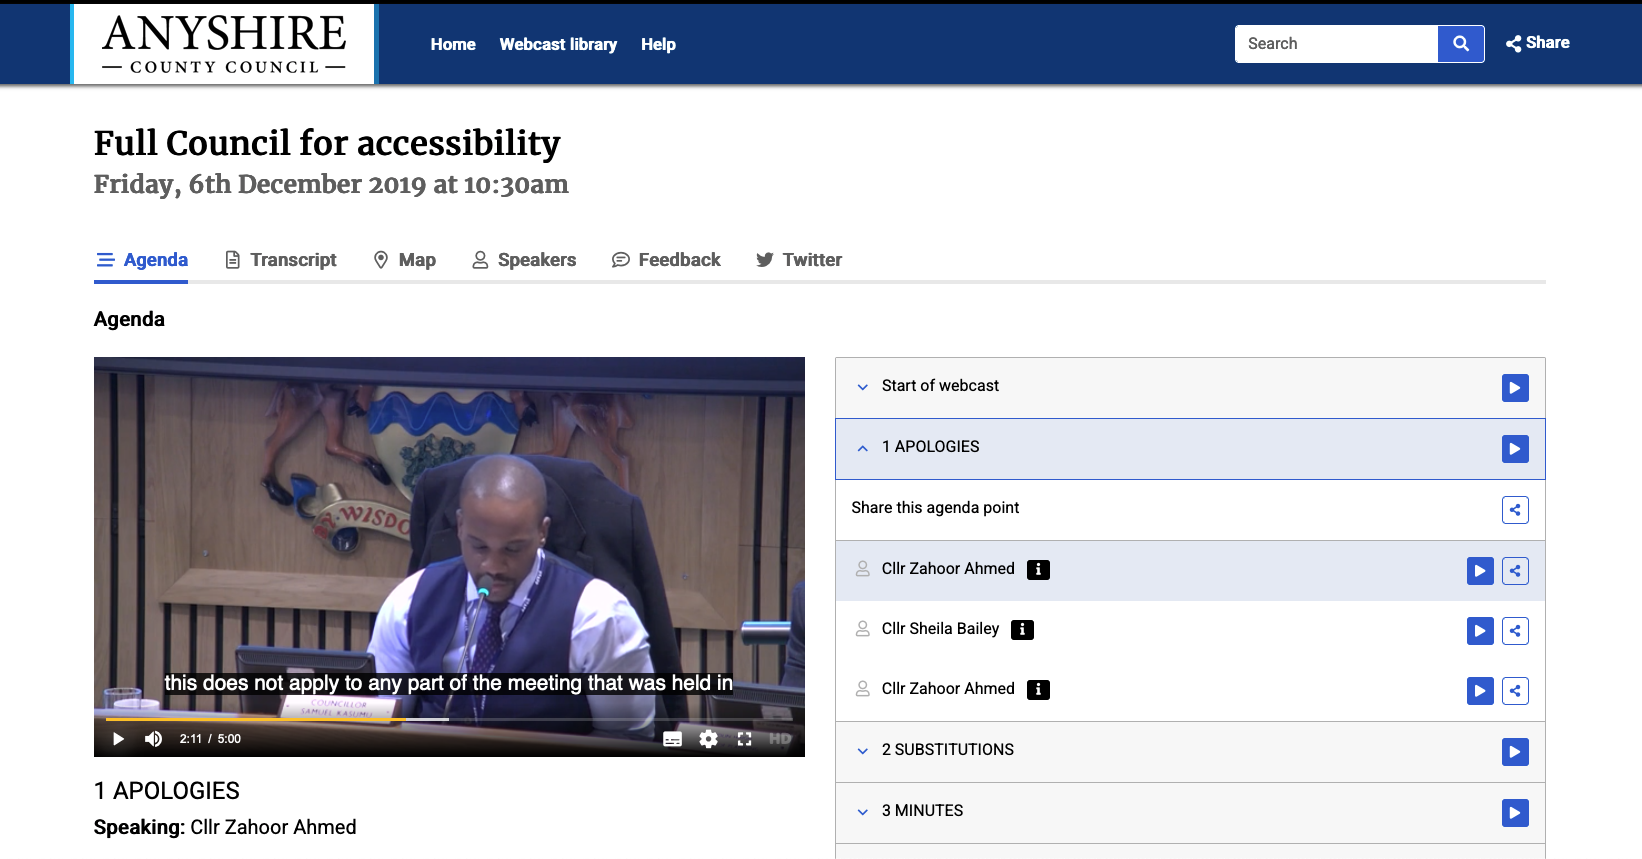 Webcast website with transcript, subtitles, agenda points, speakes, documents and presentations, feedback form,...